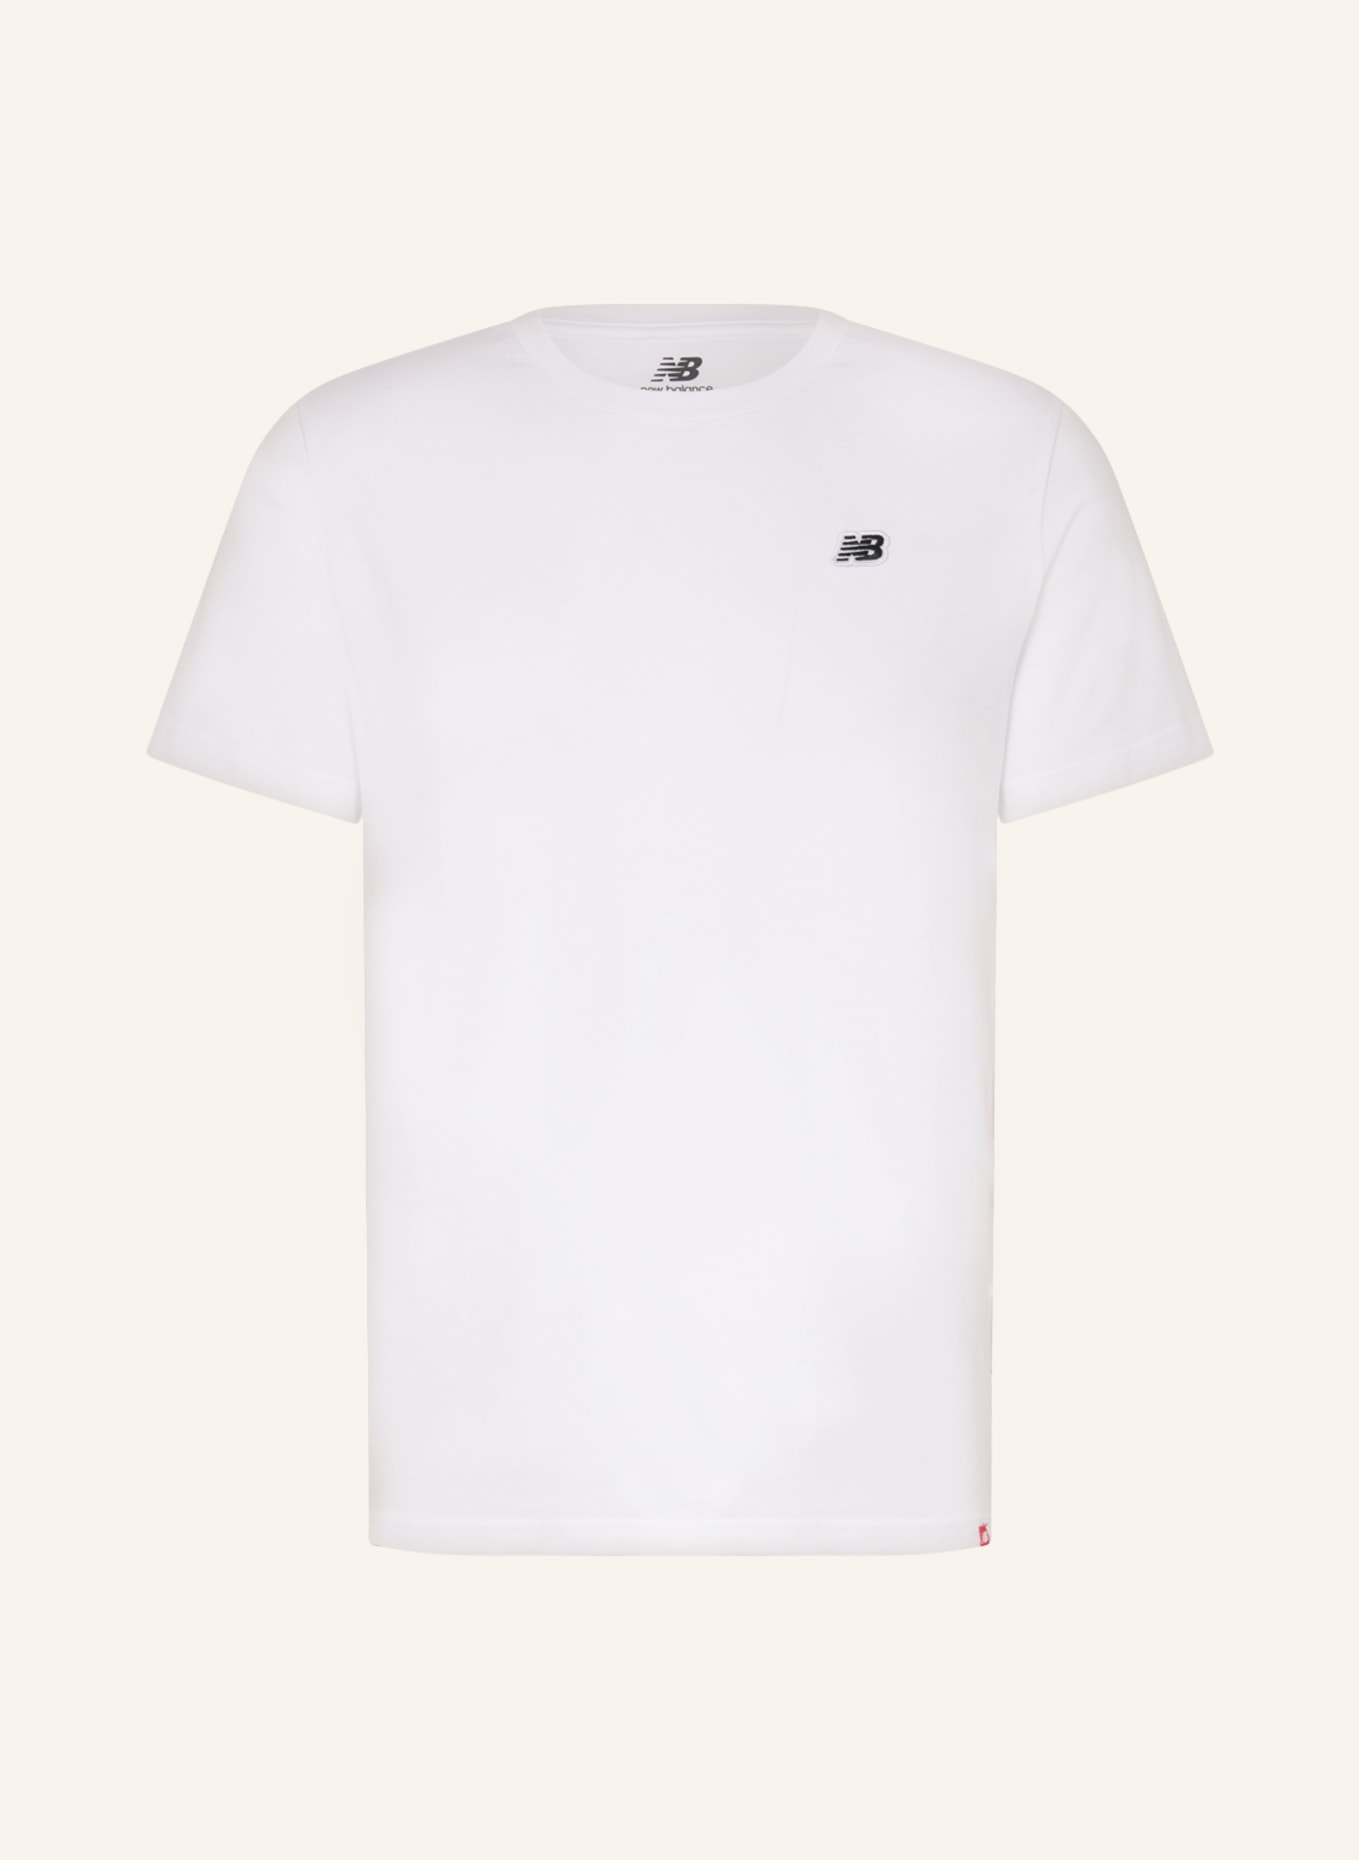 NB white T-shirt new SMALL in balance